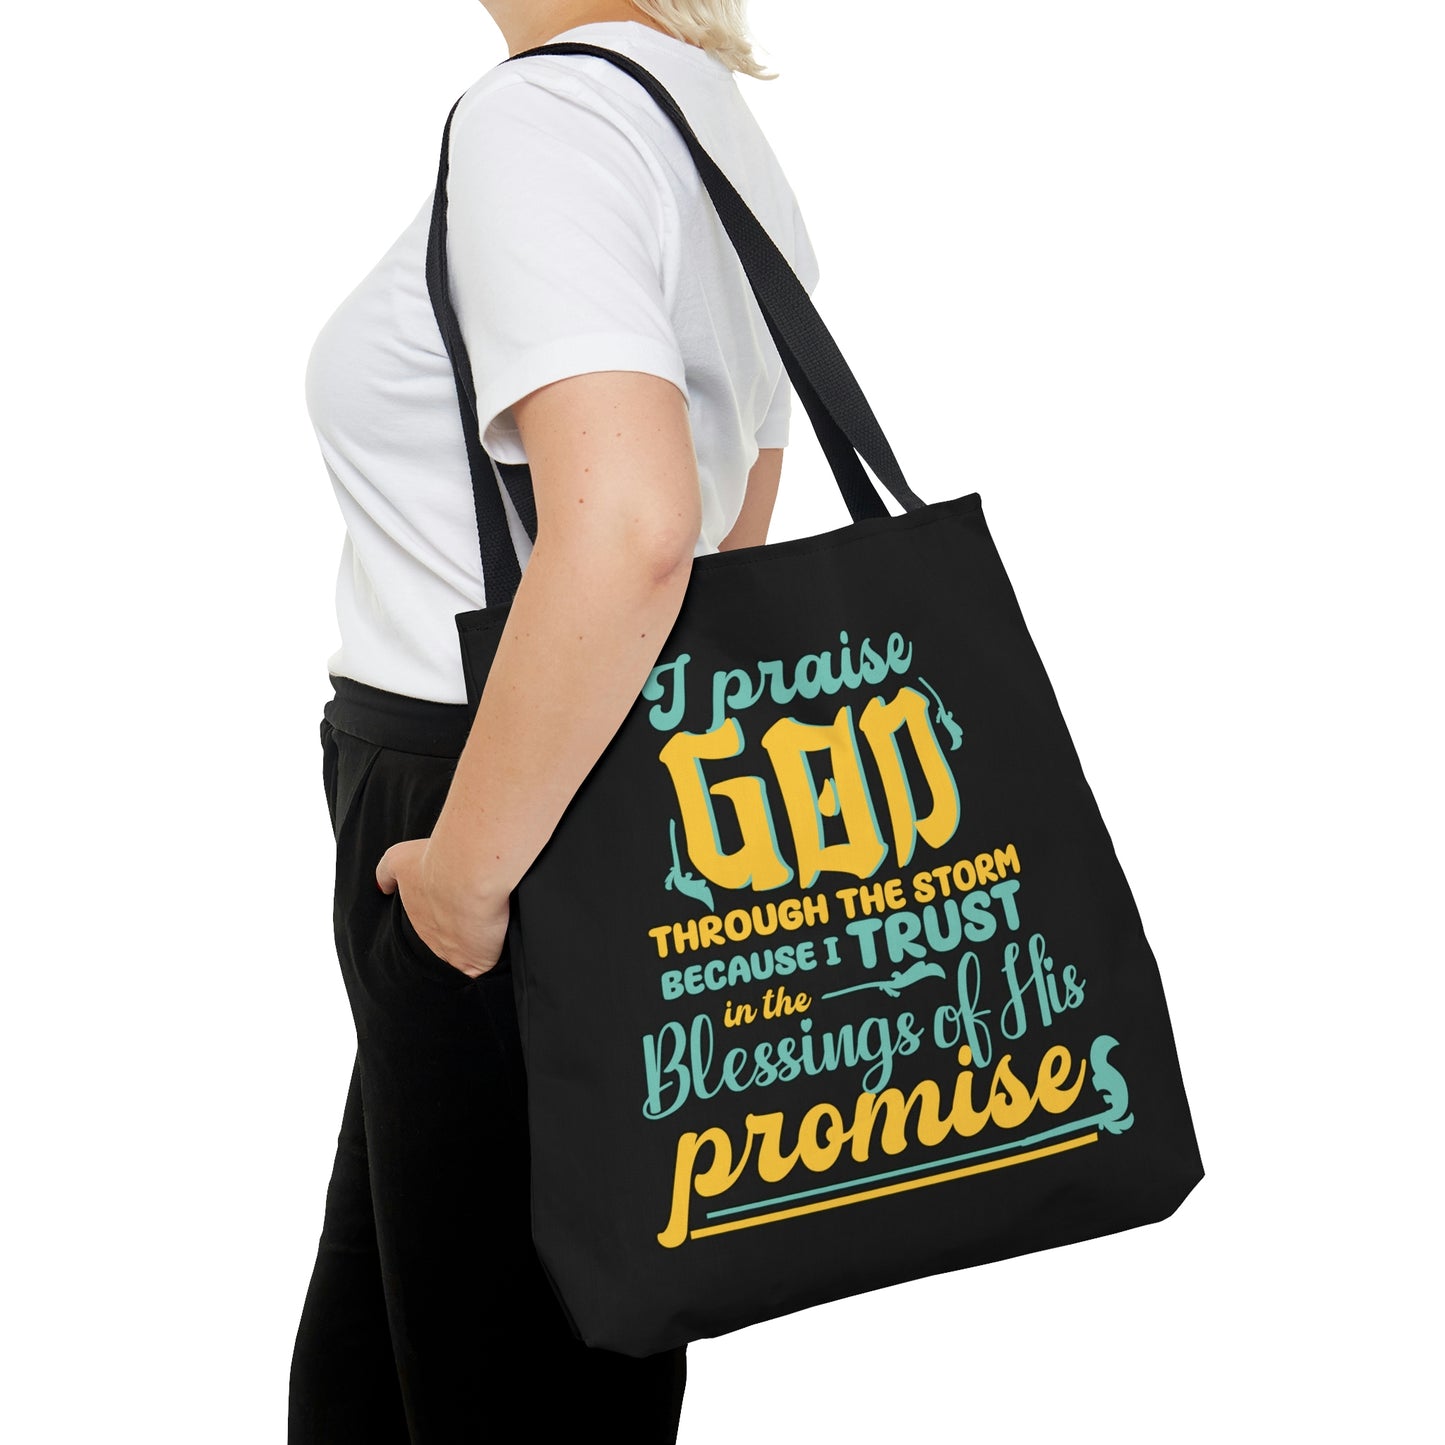 I Praise God Through The Storm Because I Trust In The Blessings Of His Promise Tote Bag